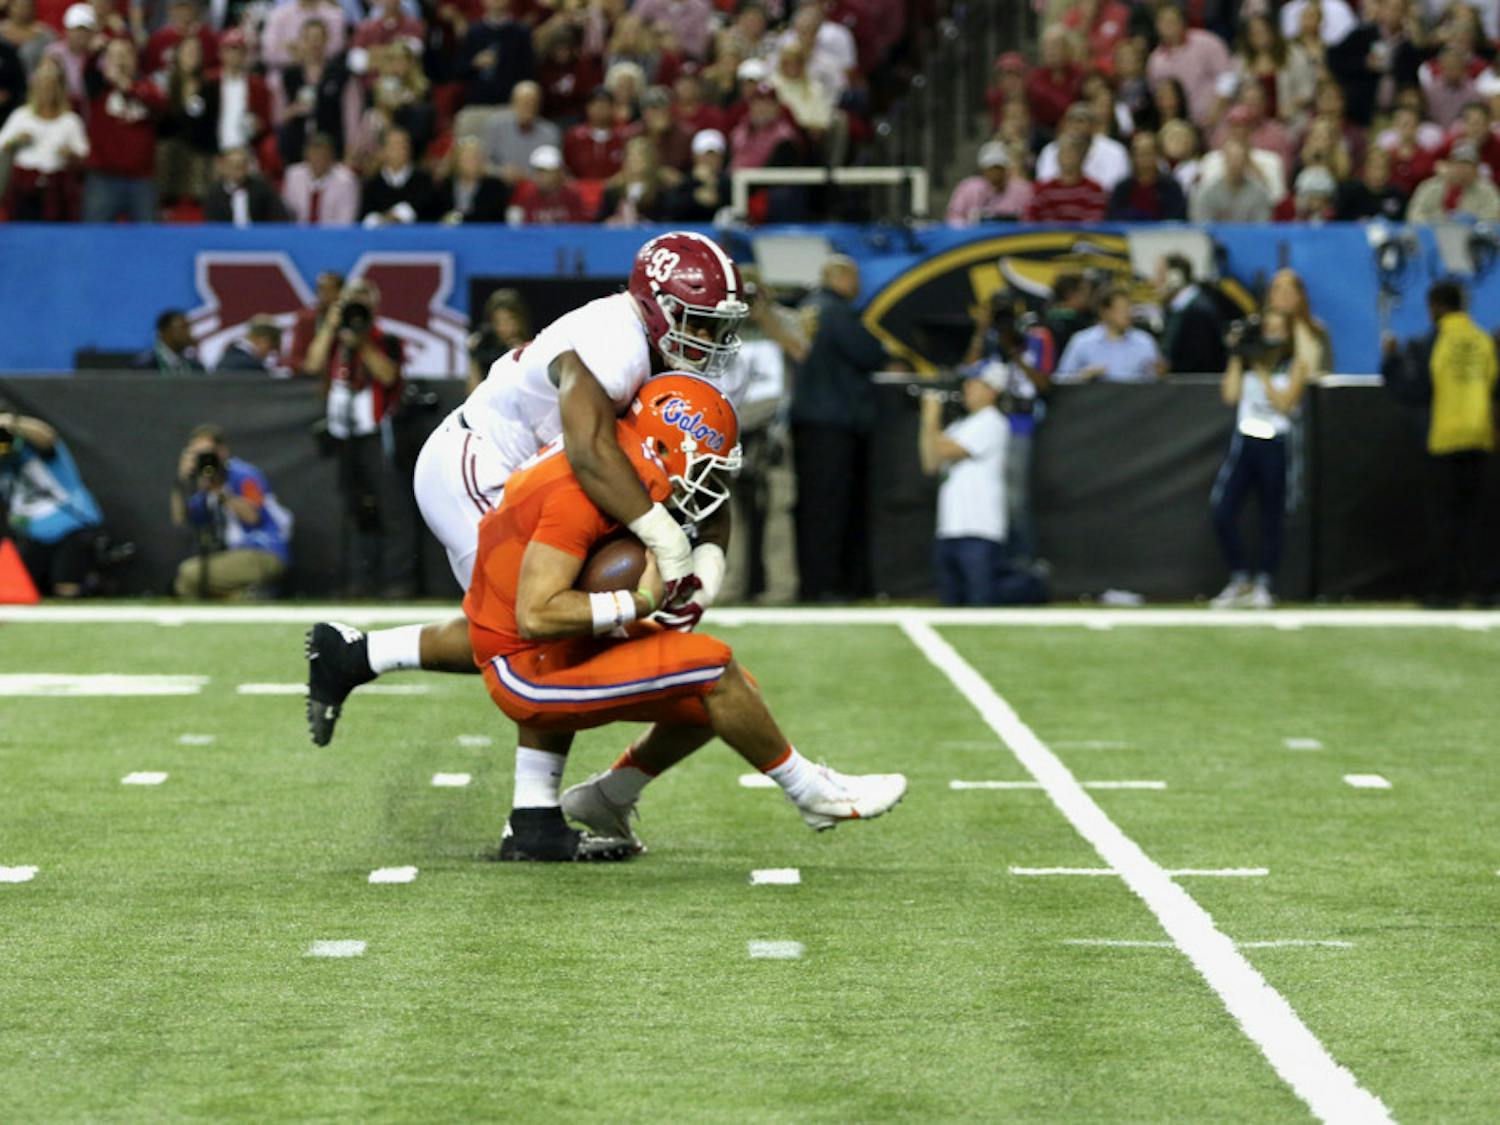 UF quarterback Austin Appleby gets sacked by Alabama defensive lineman Jonathan Allen during Alabama's 54-16 win over Florida in the 2016 Southeastern Conference Championship Game. 